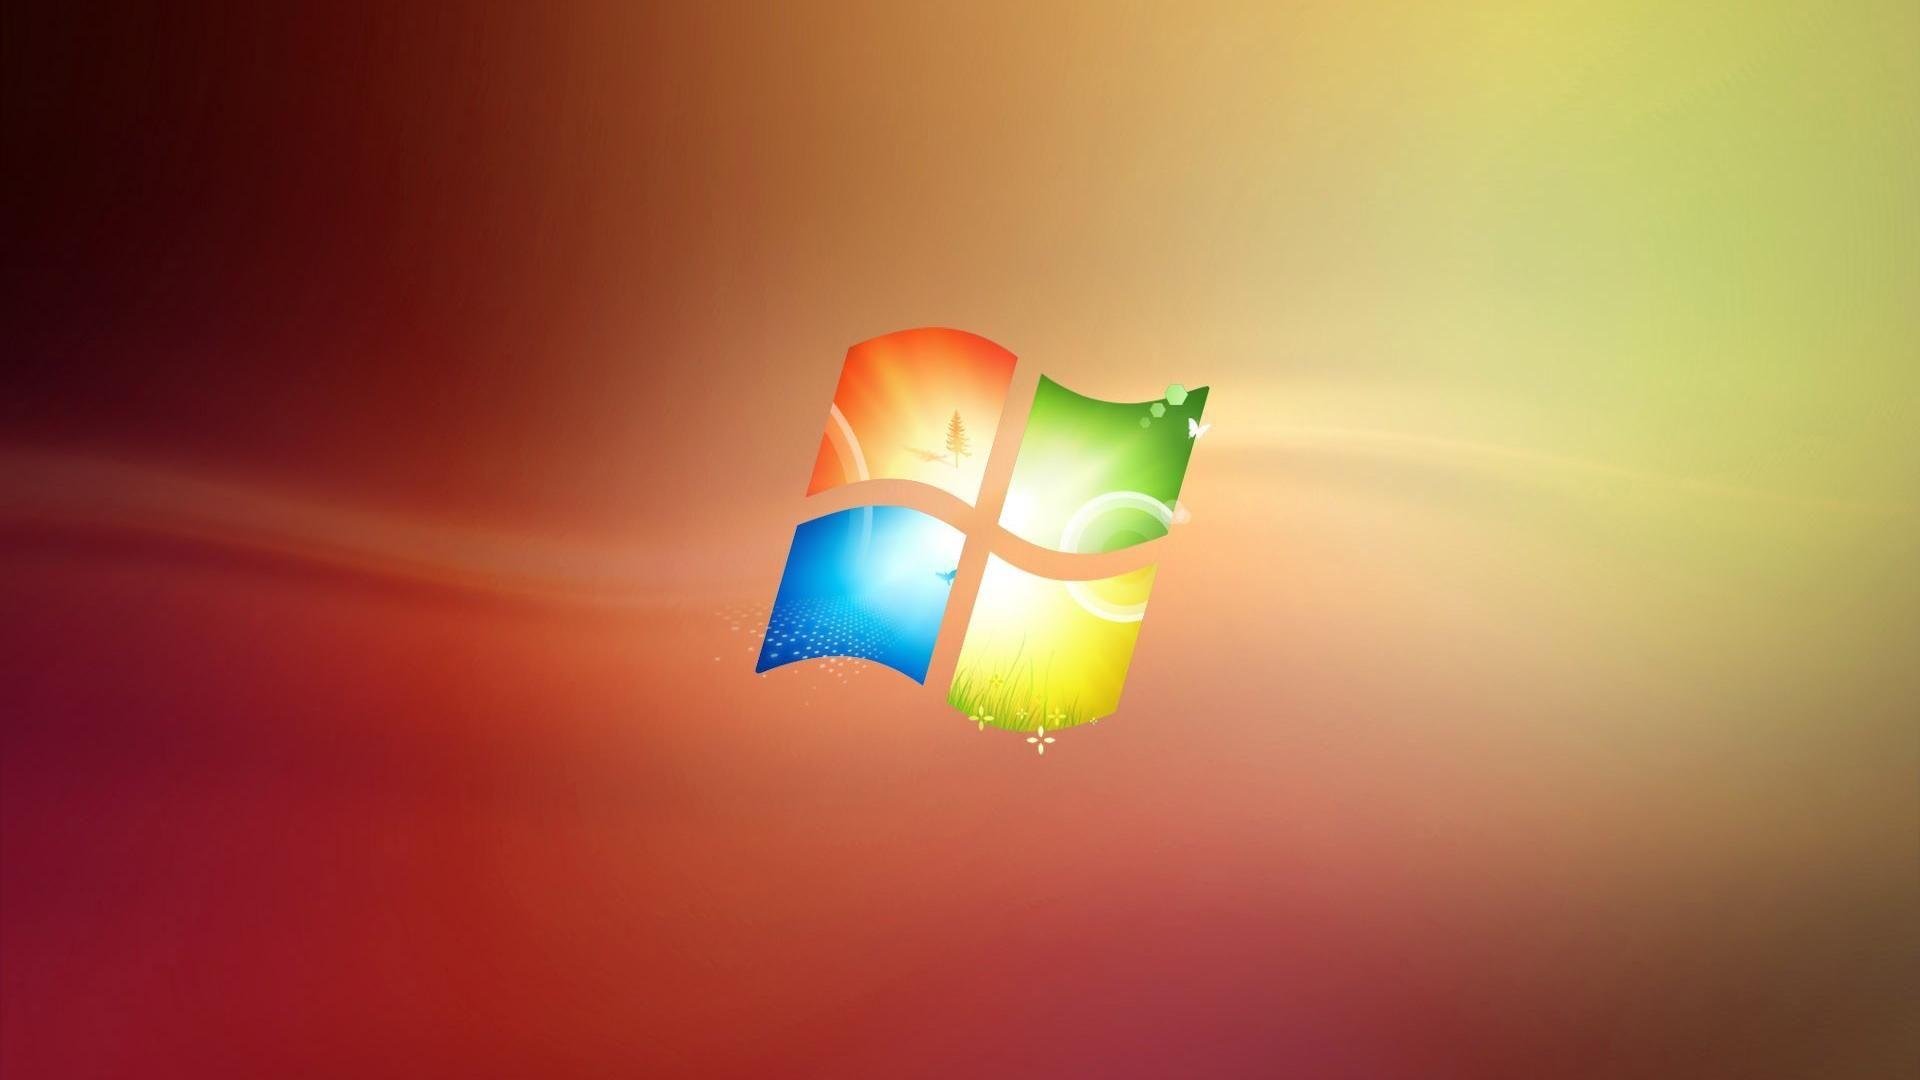 Cool Windows 7 Wallpaper, Picture